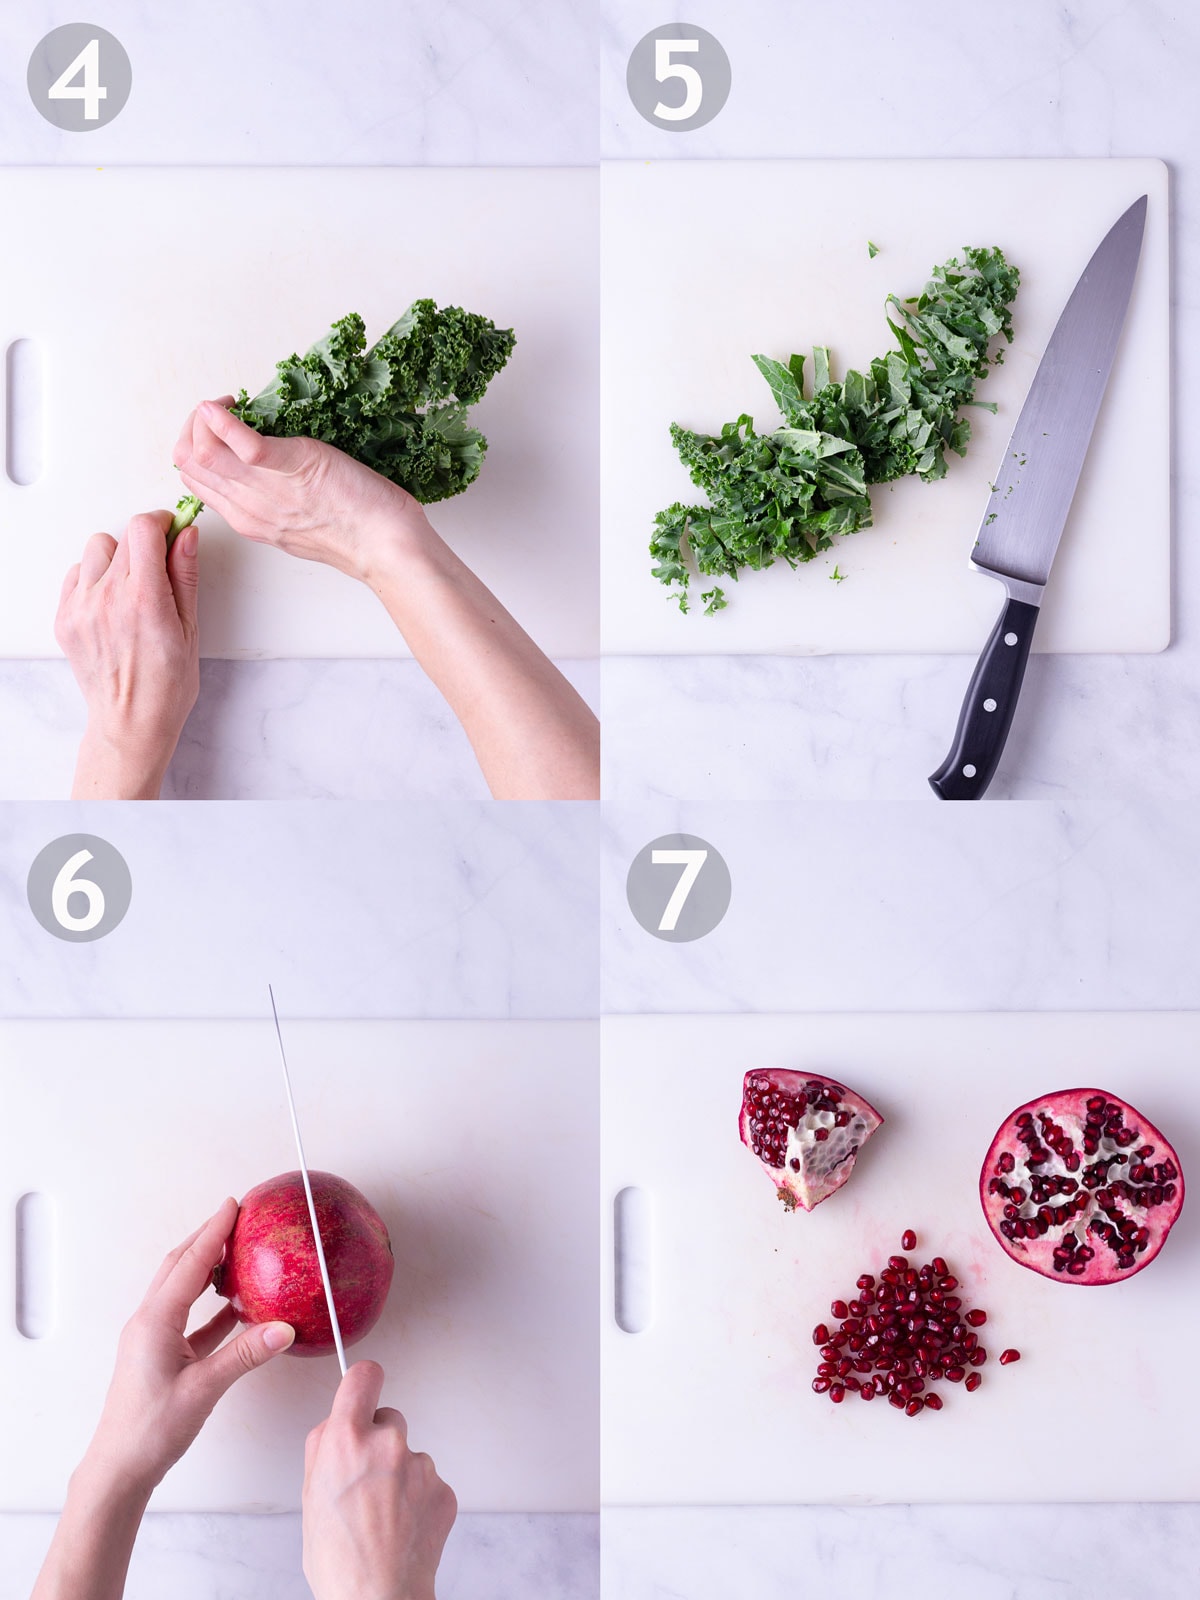 Steps to chop kale and deseed pomegranates.